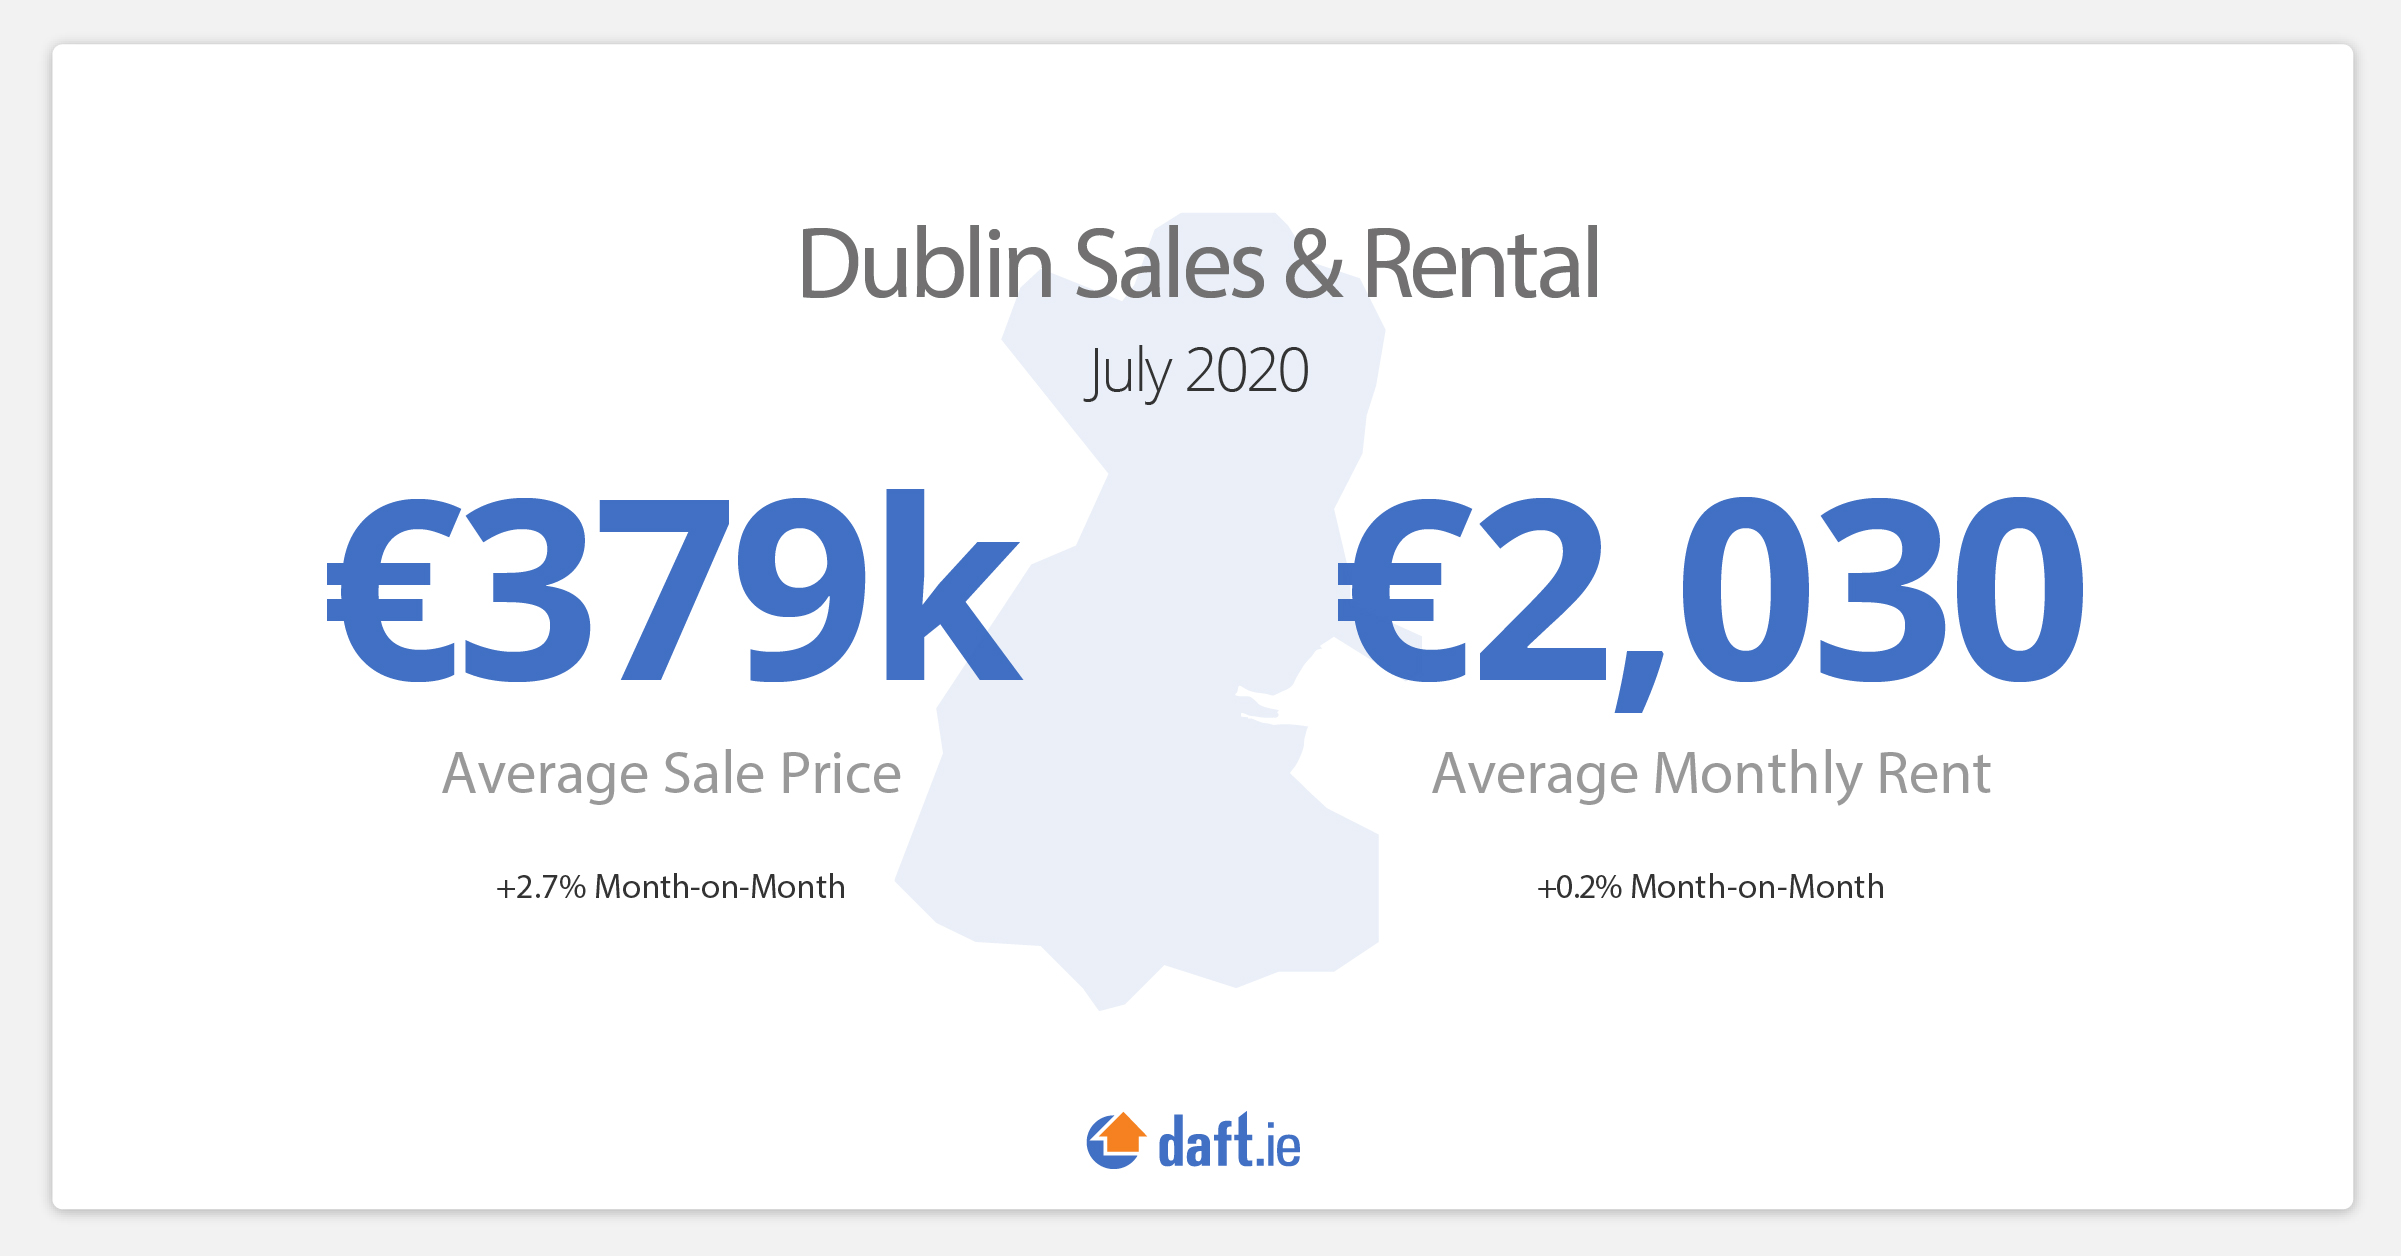 Dublin sales and rental average prices